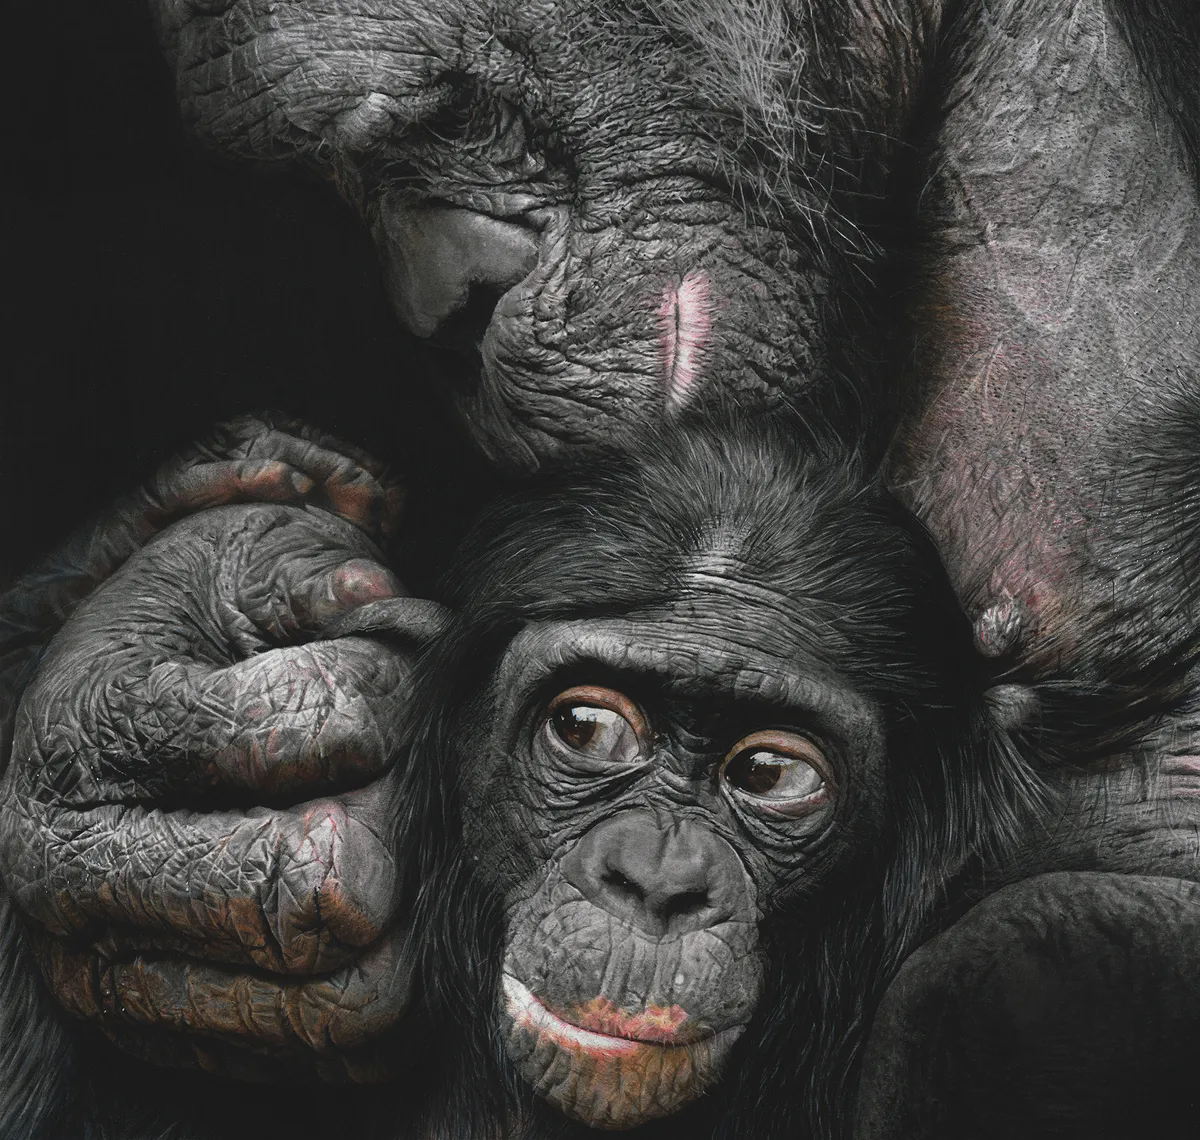 Animal Behaviour category winner: Father & Son, by Szilvia Mate.